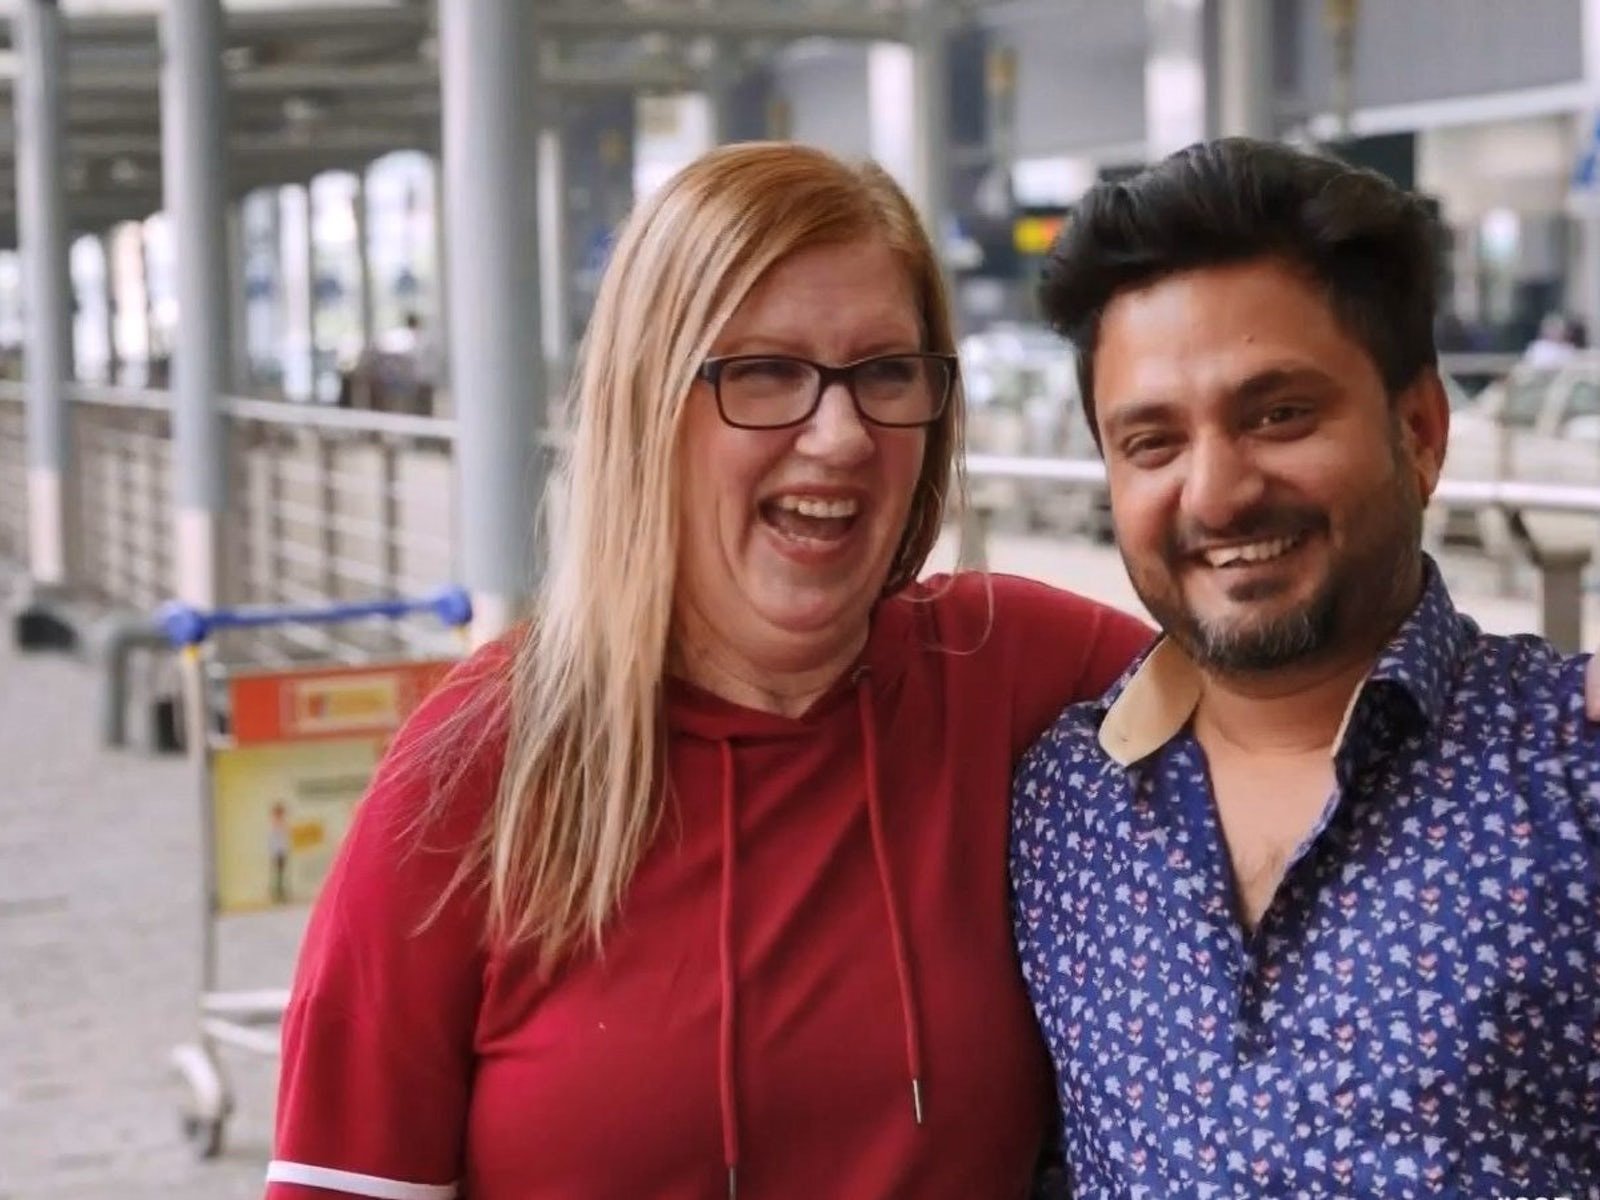 90 Day Fiancé The Other Way stars Jenny and Sumit, wearing